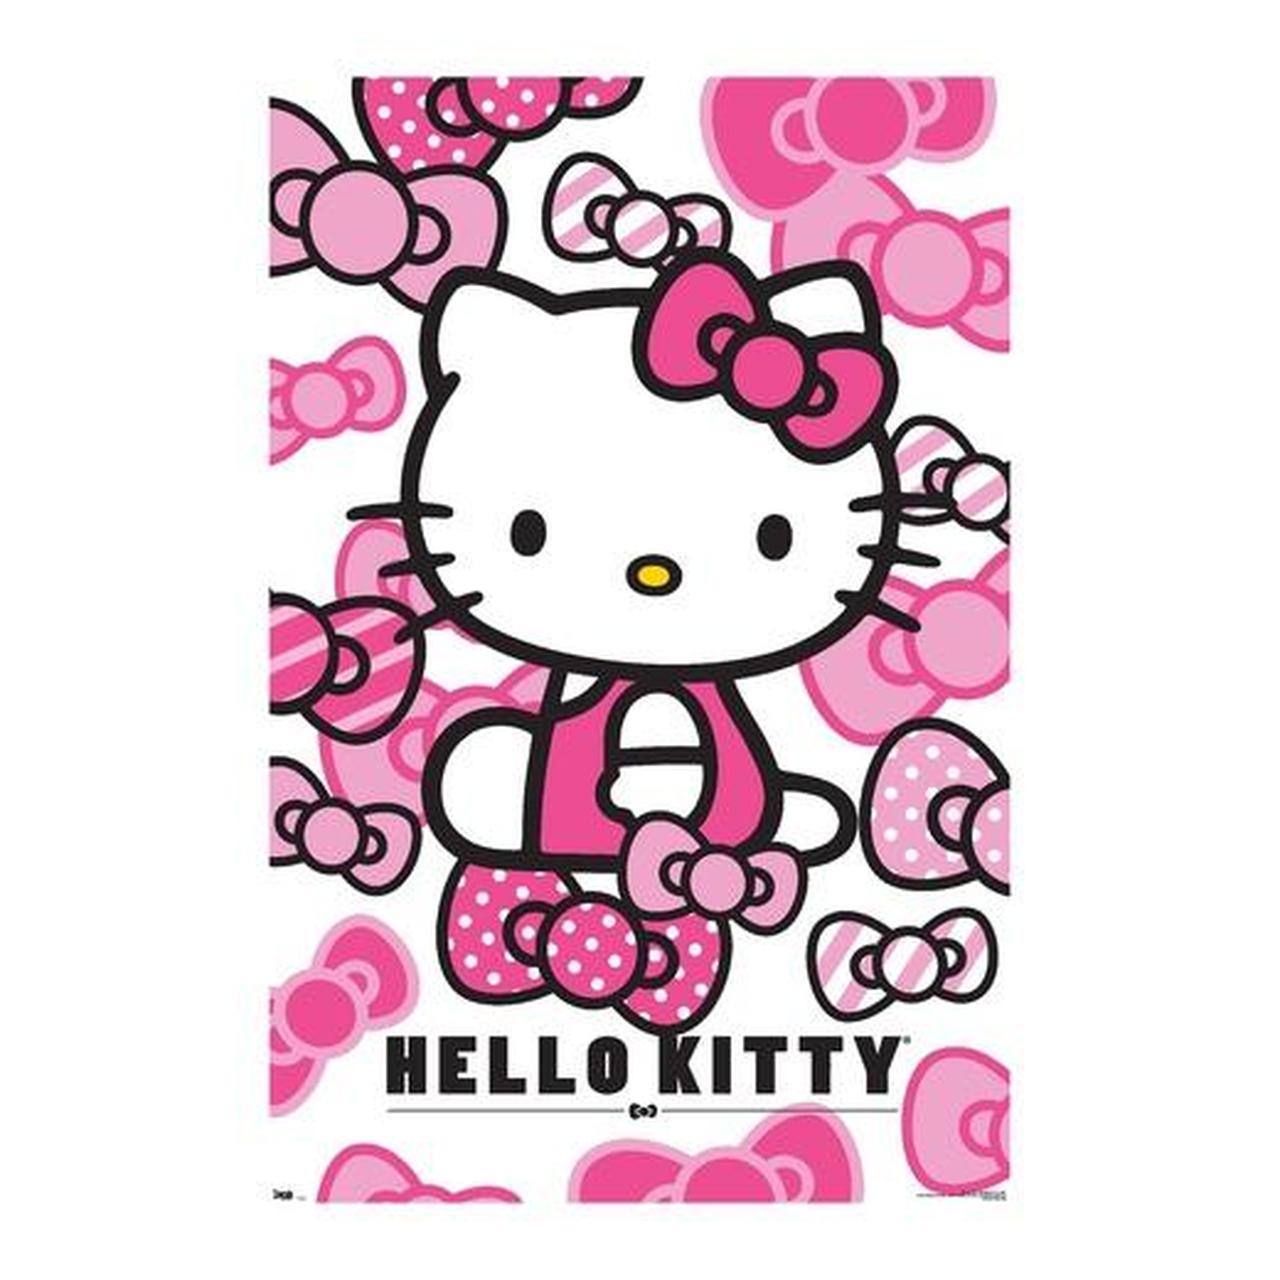 hello kitty® happiness overload poster 22.375in x 34in